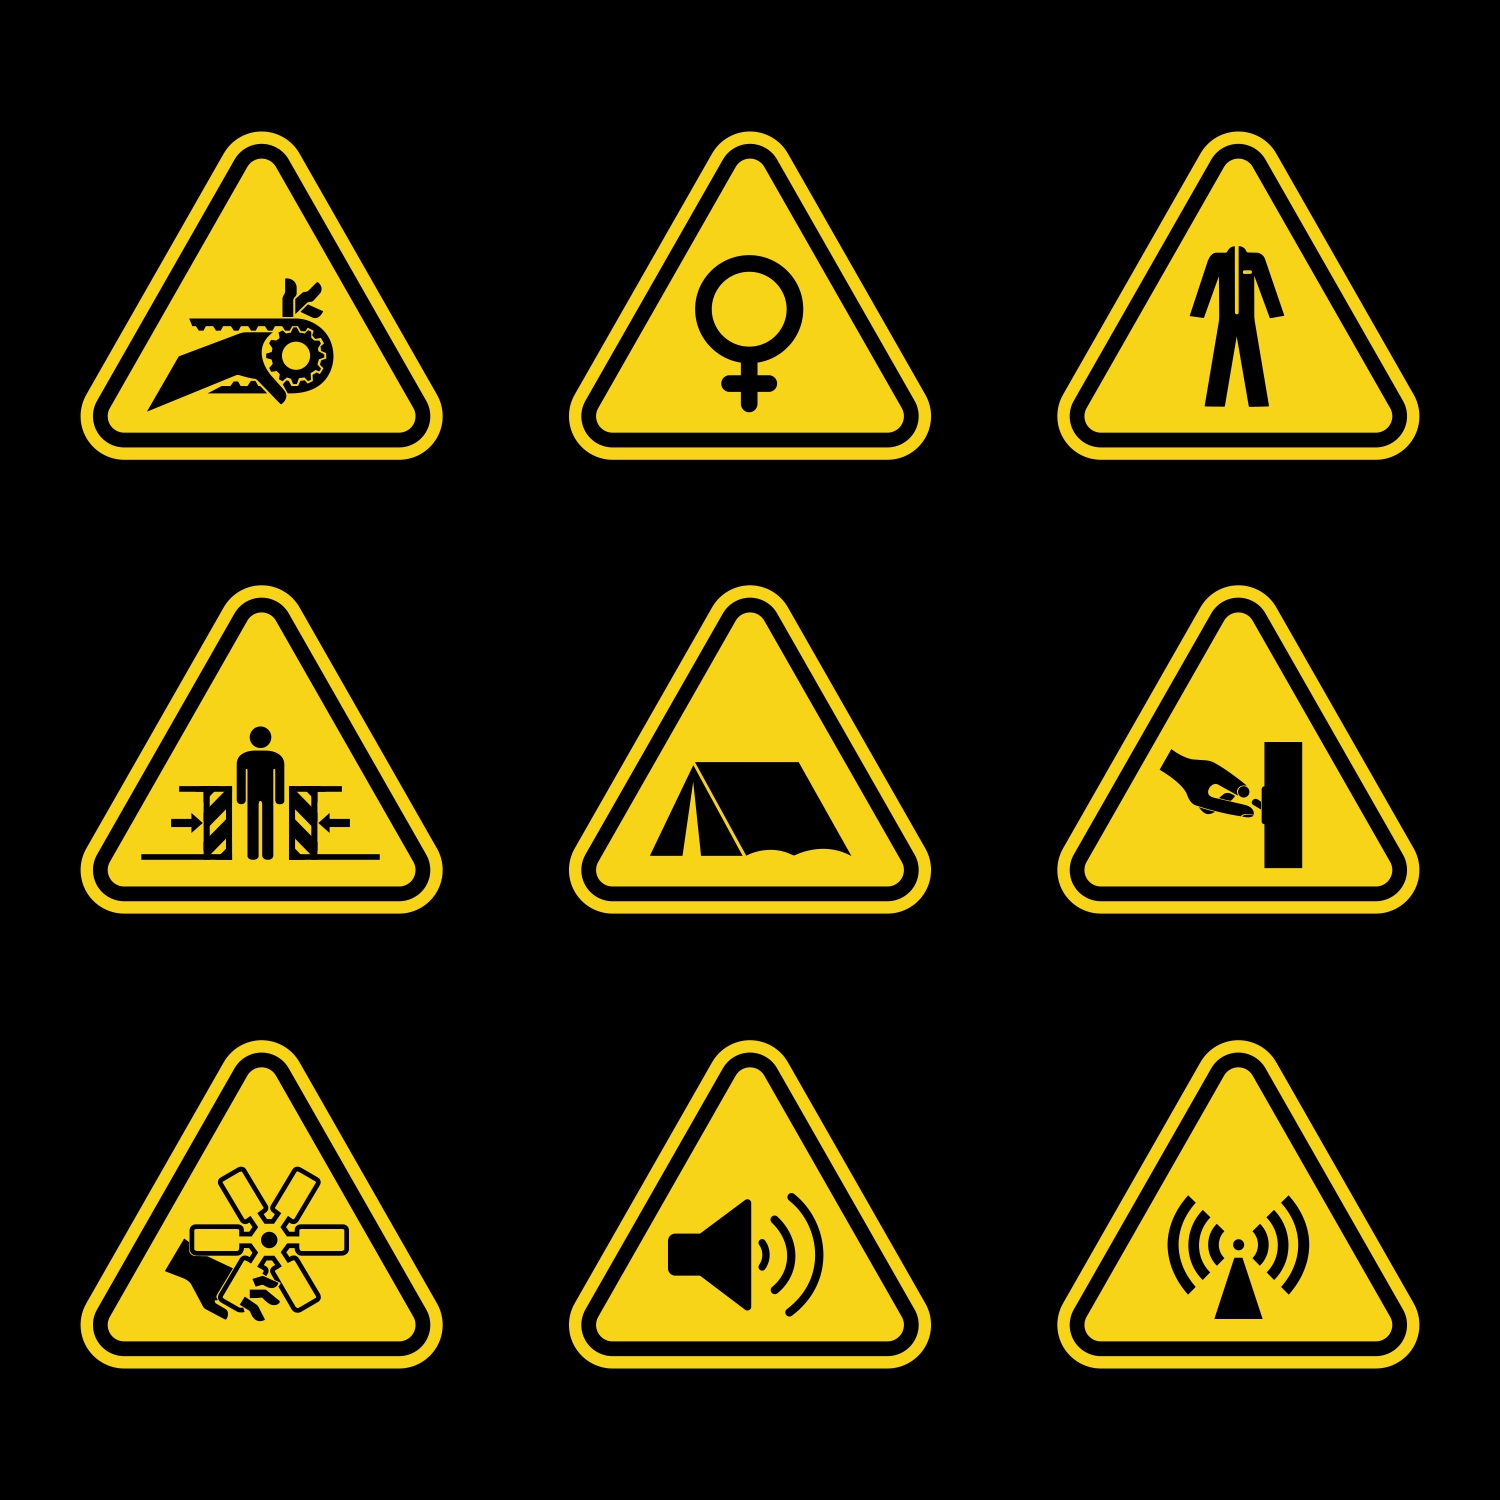 free vector Warning Sign Set with Black Icons in Yellow Triangle CDR file download for free